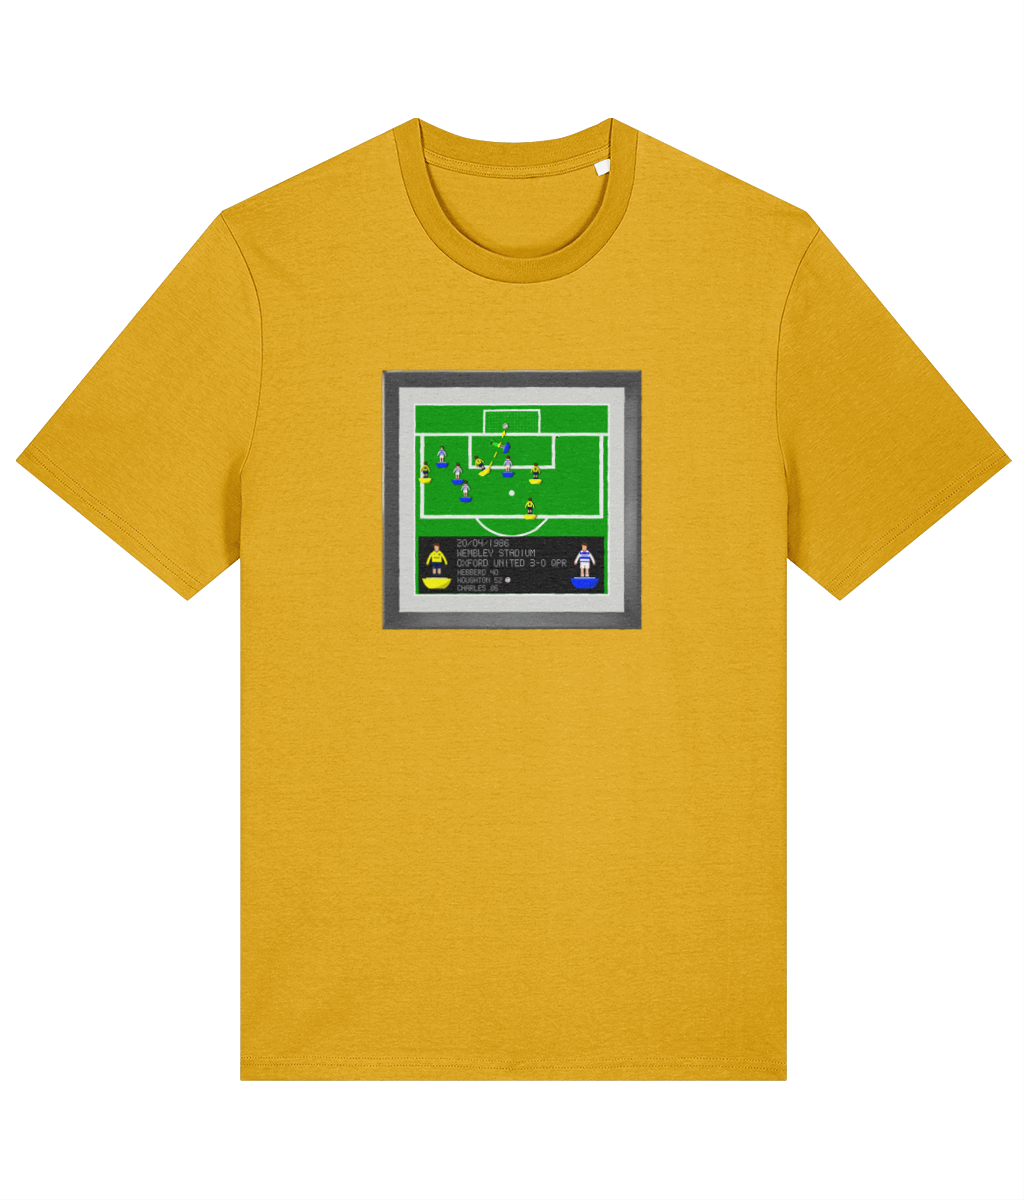 Football Iconic Moments 'Houghton - OXFORD UNITED V QPR 1986' Unisex T-Shirt